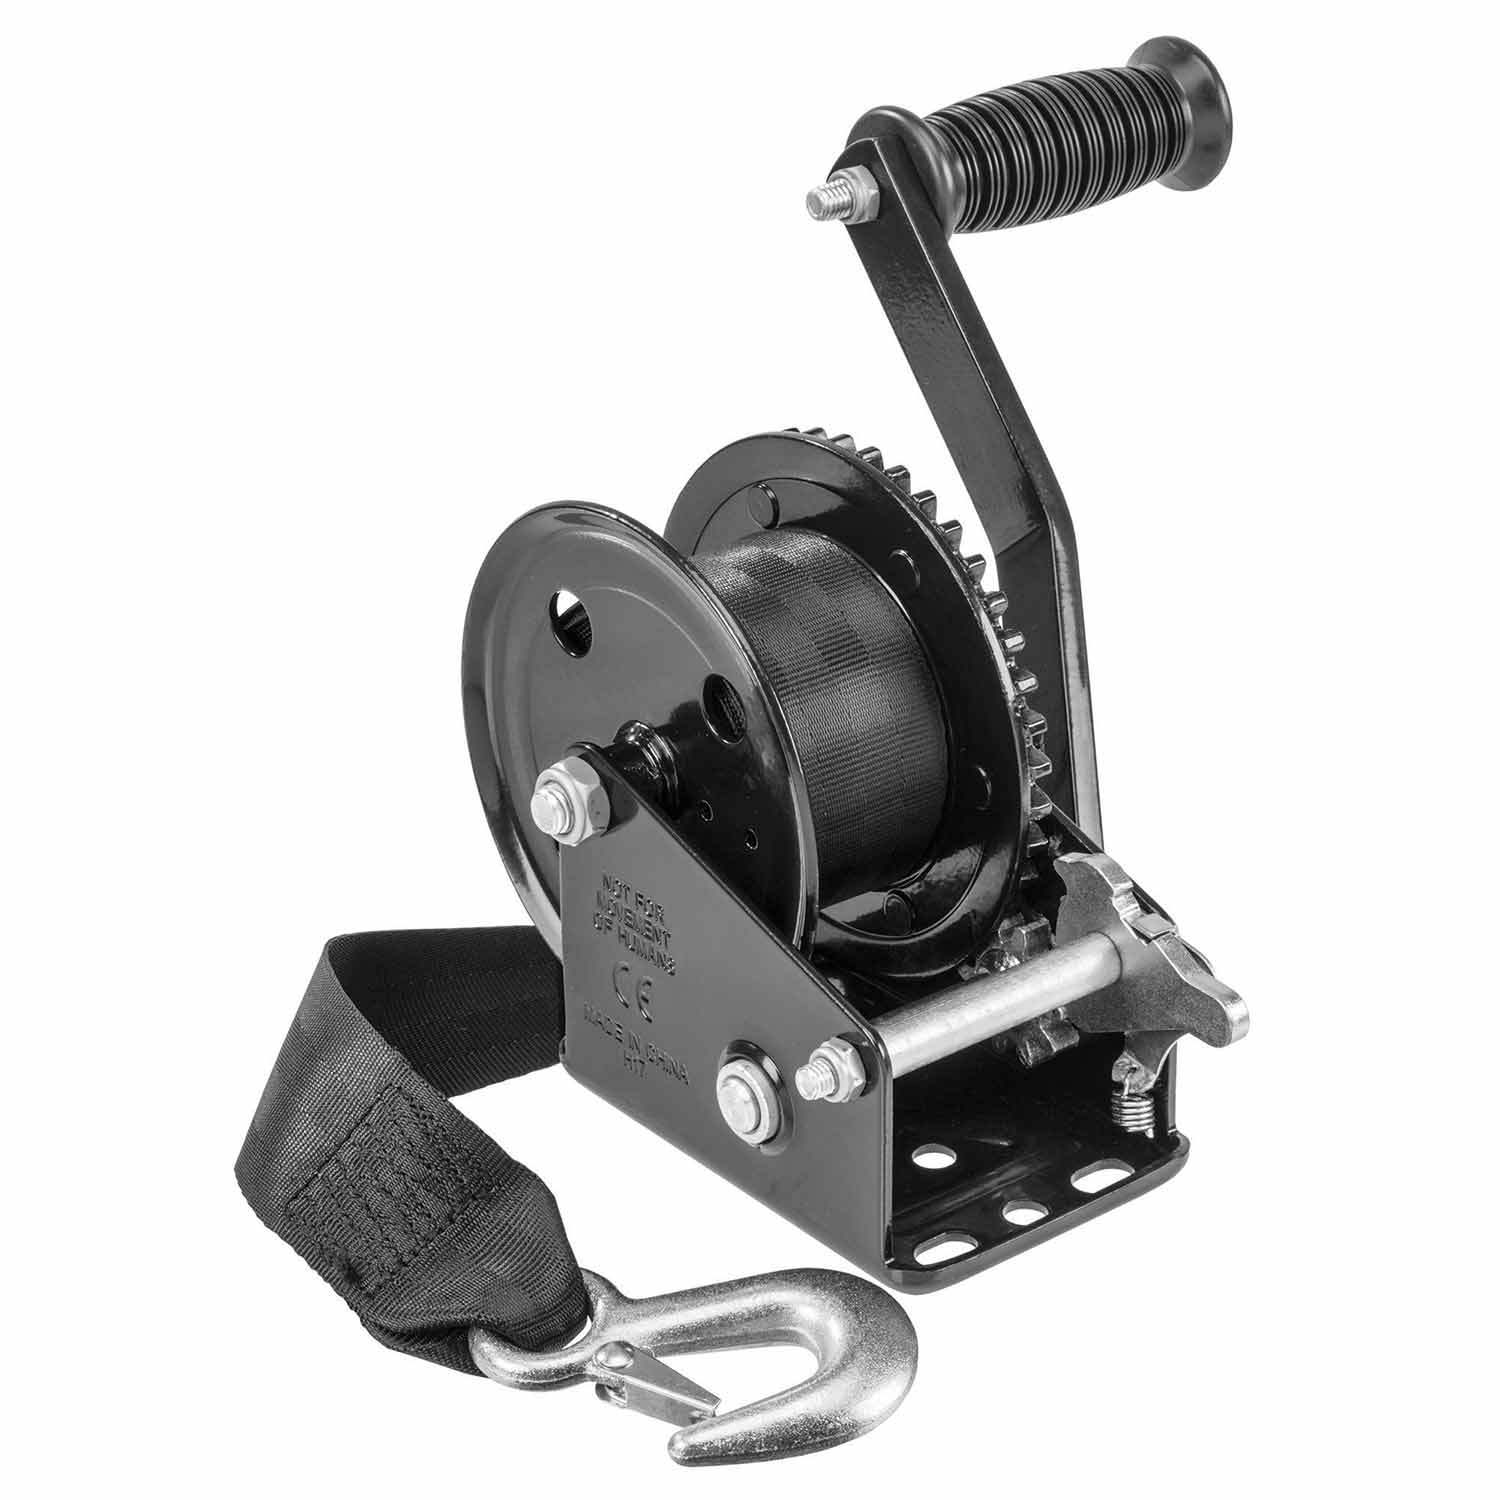 findmall Boat Trailer Winch 1500lbs with 10m Steel Cable, Crank Cable Gear  Winch with Hook, Heavy Duty Hand Winch with 4.1:1 Ratio for Boat, Trailer